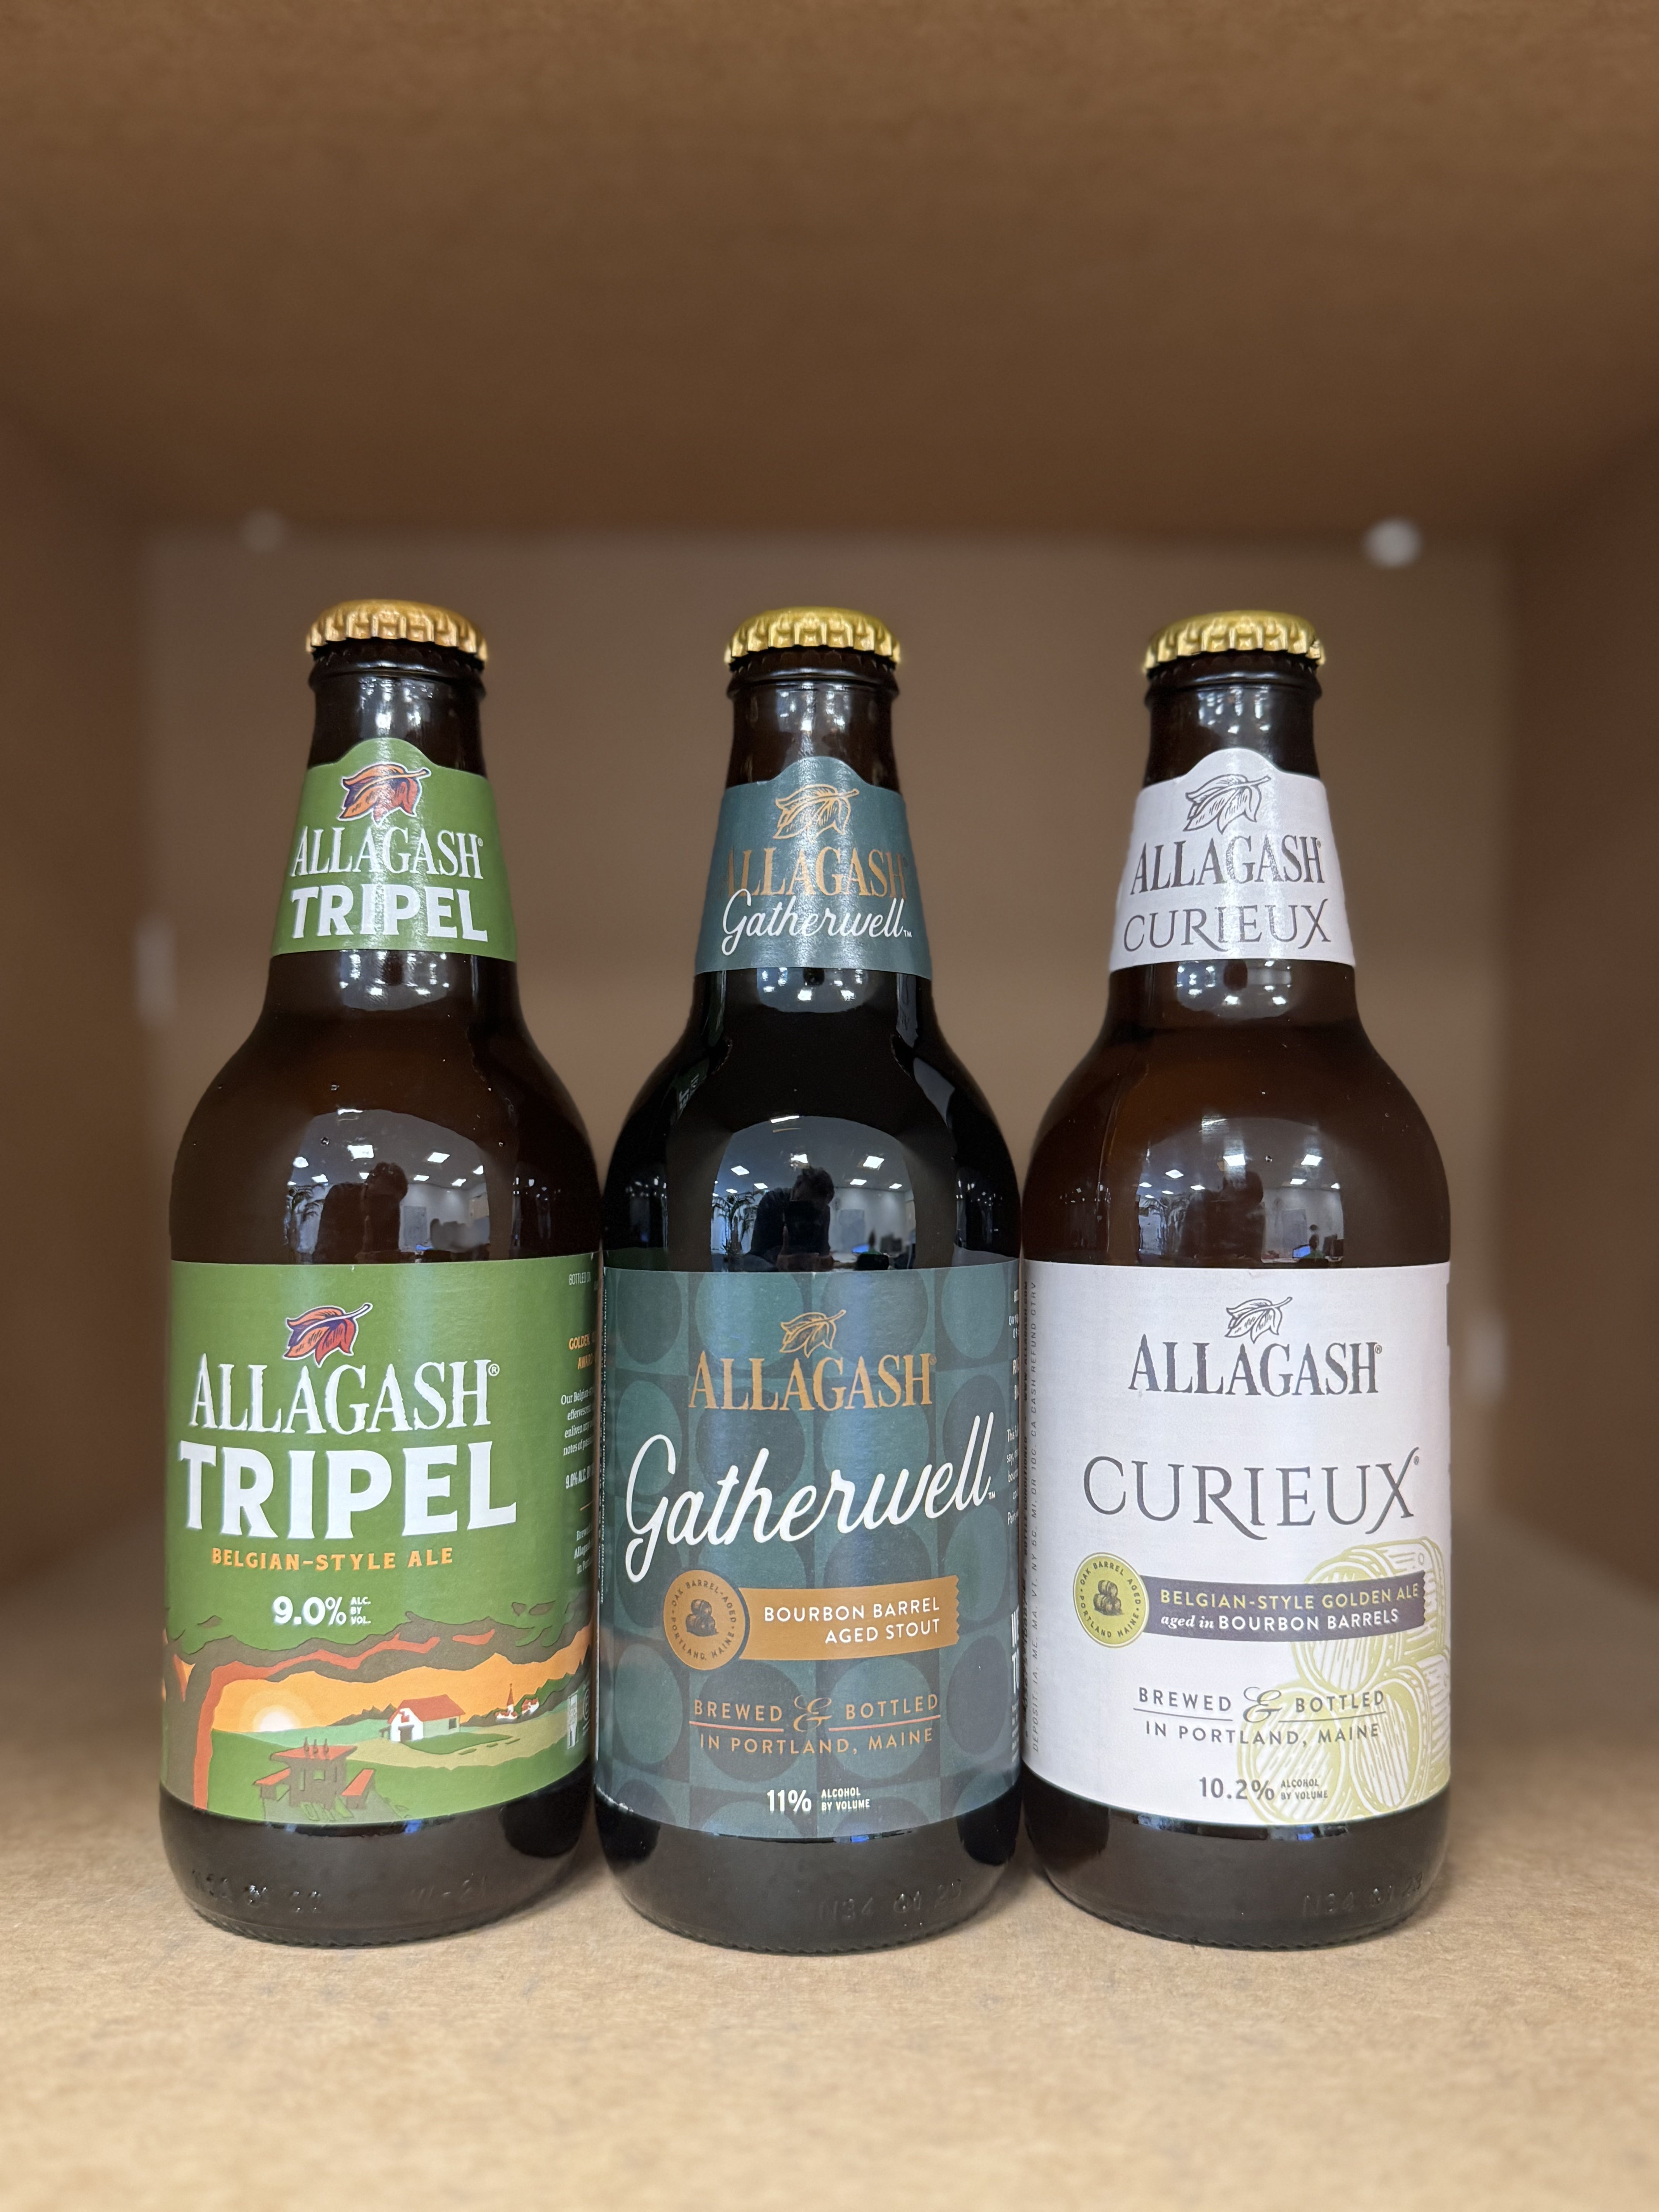 -Allagash- Allagash 🚀 Take Off Set 2-Packs & Cases- Only @ Beer Republic - The best online beer store for American & Canadian craft beer - Buy beer online from the USA and Canada - Bier online kopen - Amerikaans bier kopen - Craft beer store - Craft beer kopen - Amerikanisch bier kaufen - Bier online kaufen - Acheter biere online - IPA - Stout - Porter - New England IPA - Hazy IPA - Imperial Stout - Barrel Aged - Barrel Aged Imperial Stout - Brown - Dark beer - Blond - Blonde - Pilsner - Lager - Wheat - Wei